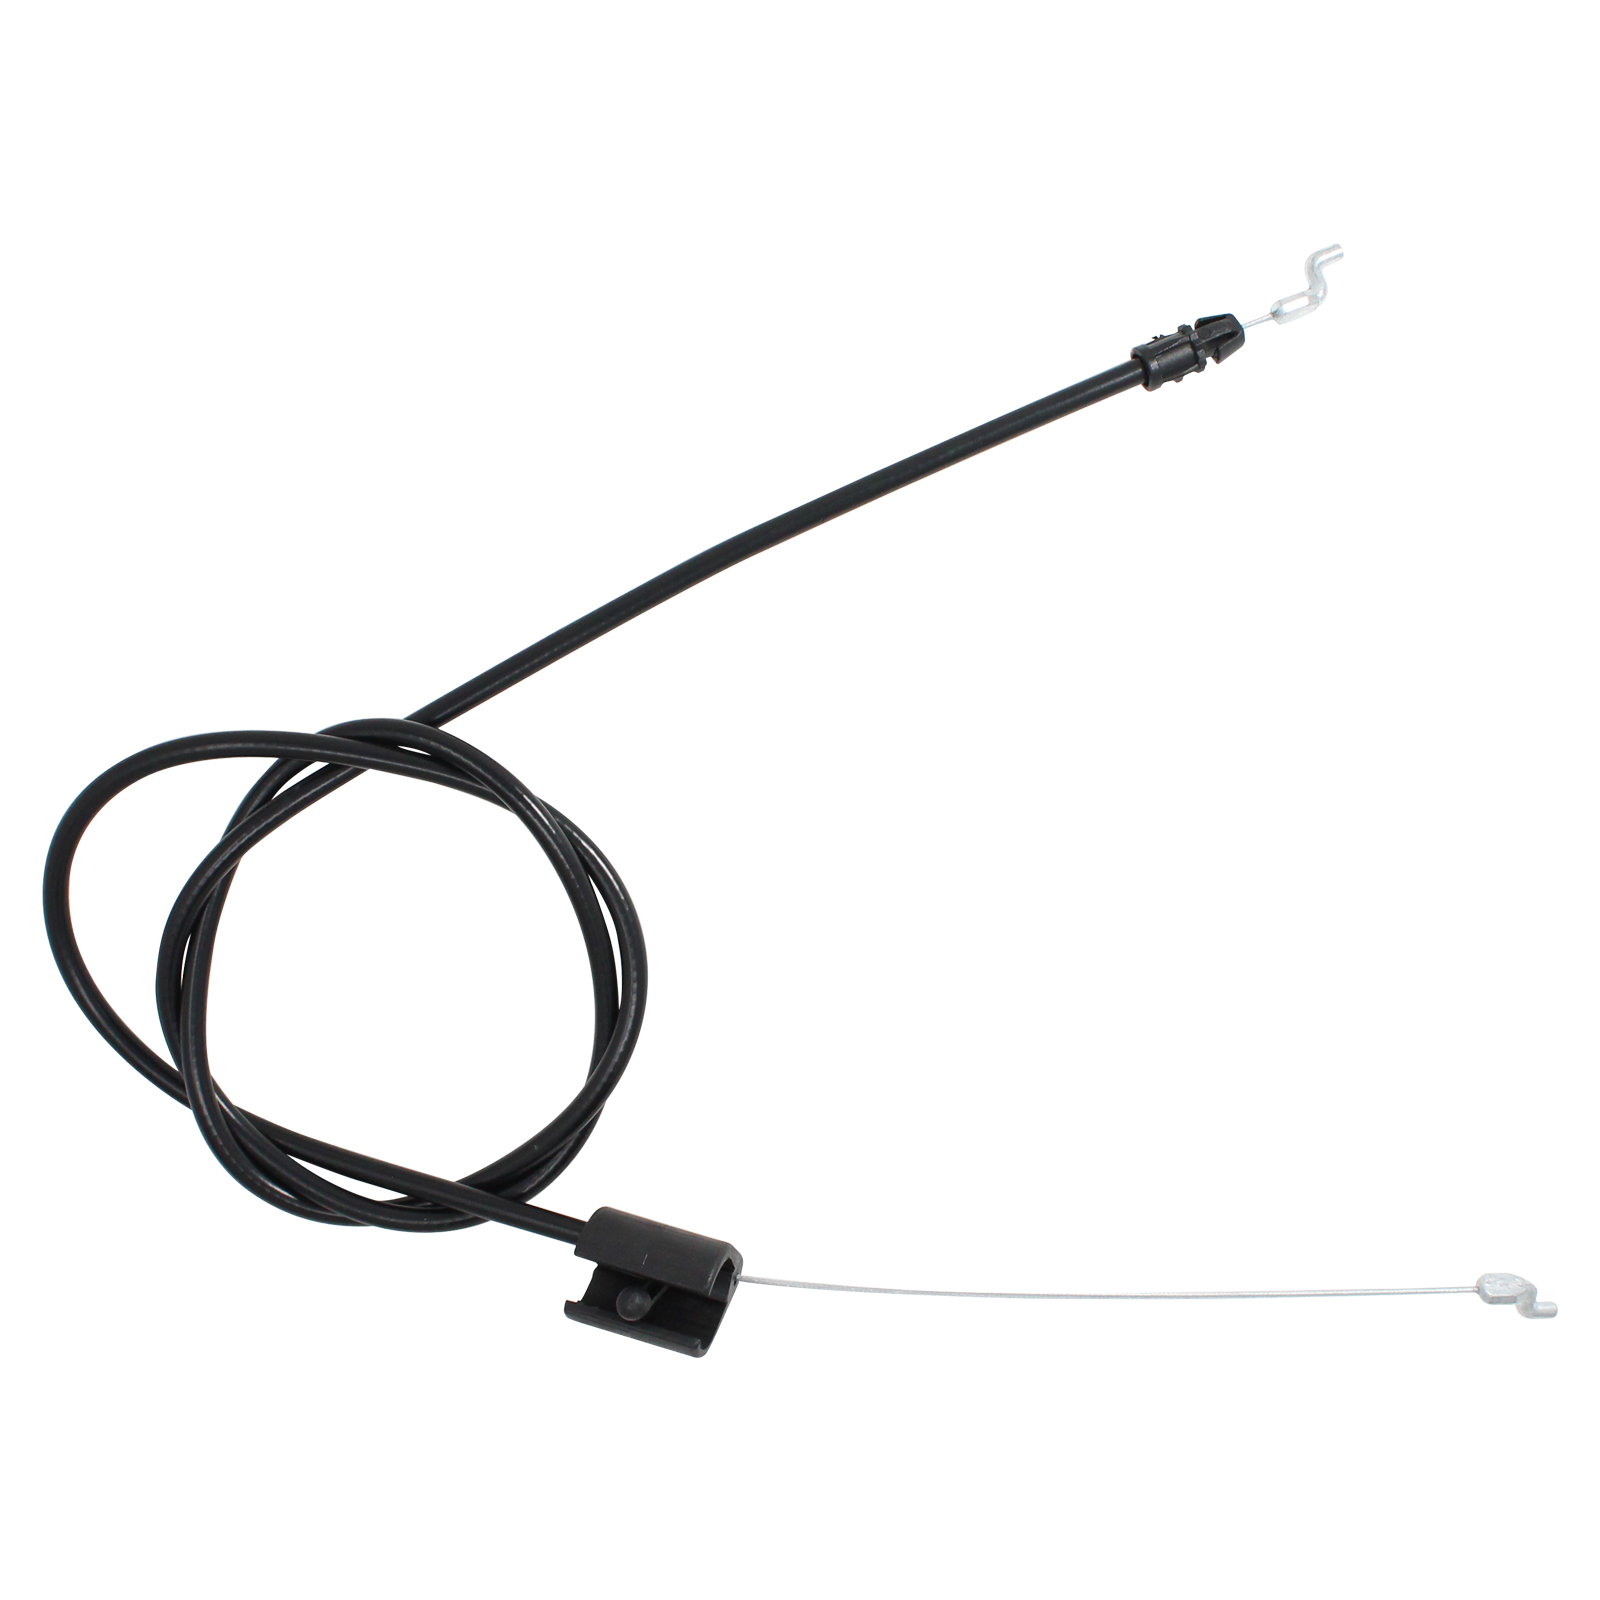 532176556 Engine Cable Replacement for Husqvarna ROTARY LAWN MOWER (96114000703) (2007-04) Lawn Mower: Consumer Walk Behind - Compatible with 176556 162778 Zone Control Cable - image 4 of 4